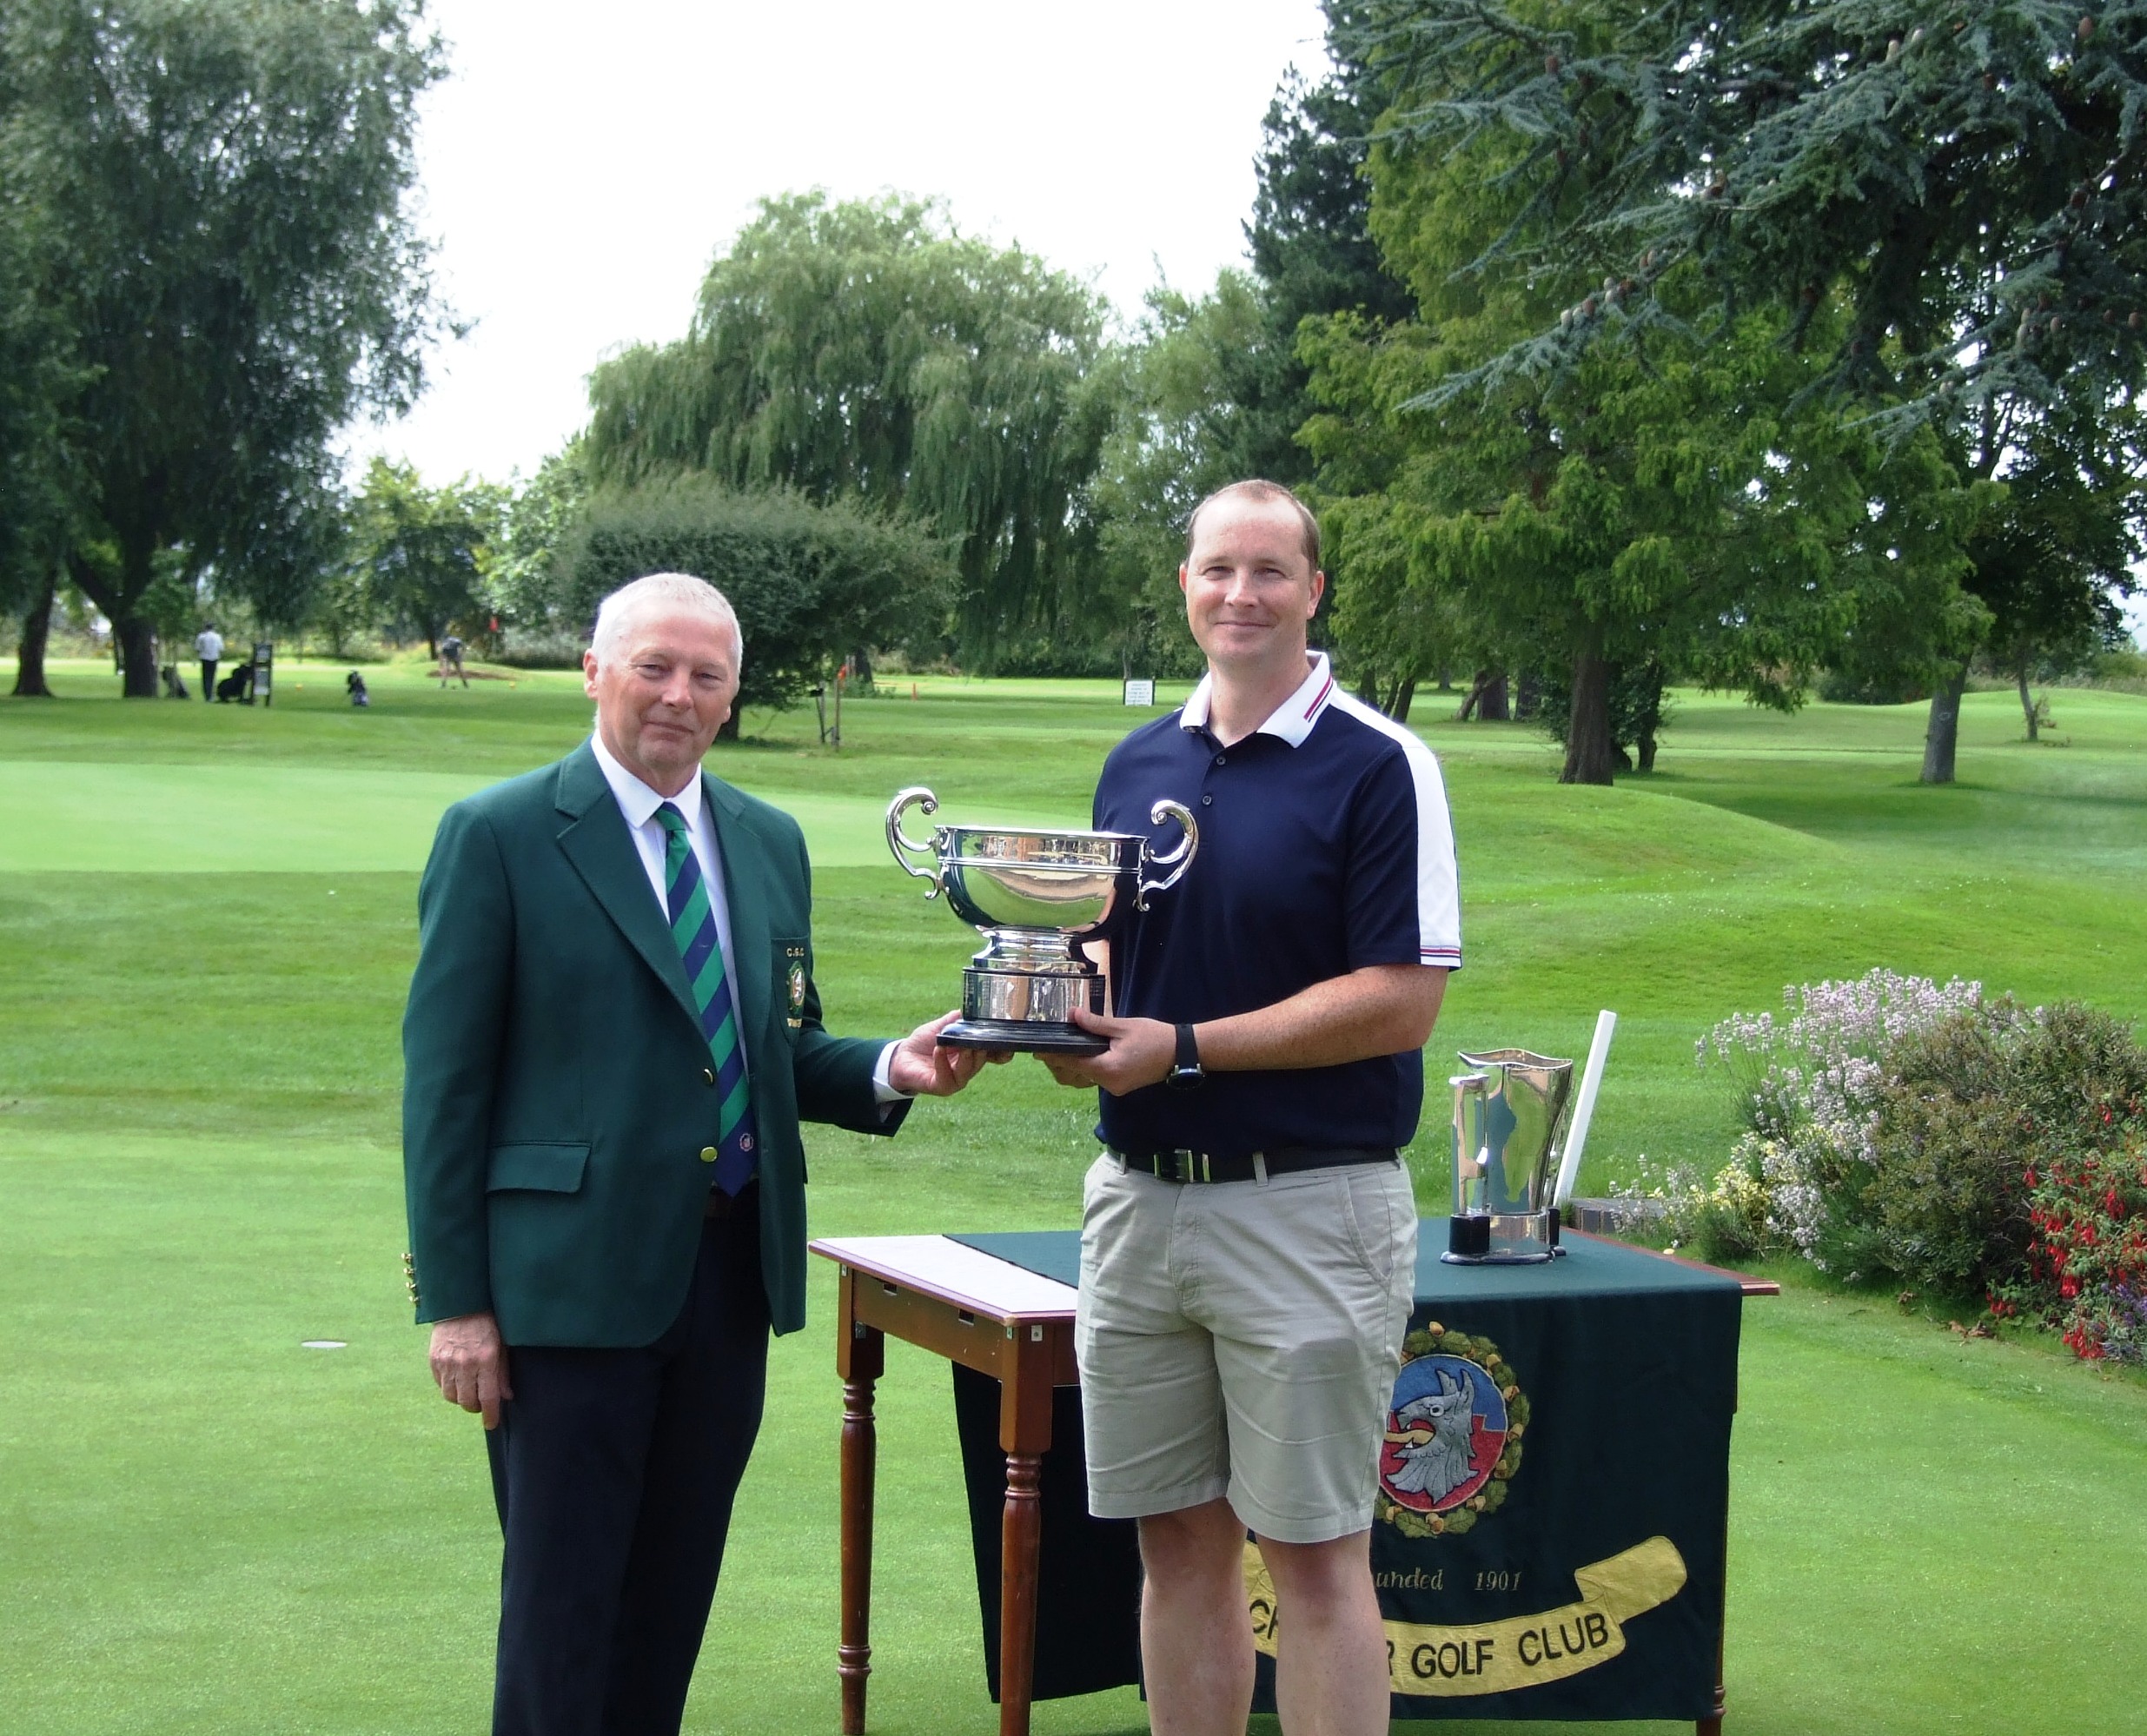 Dan Percy, Club Champion. Presented by the Captain